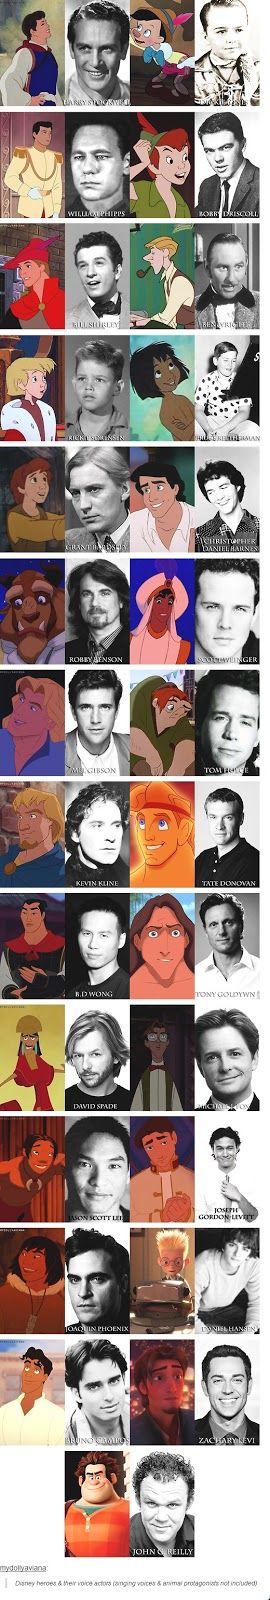 Male Disney characters and the voice actors